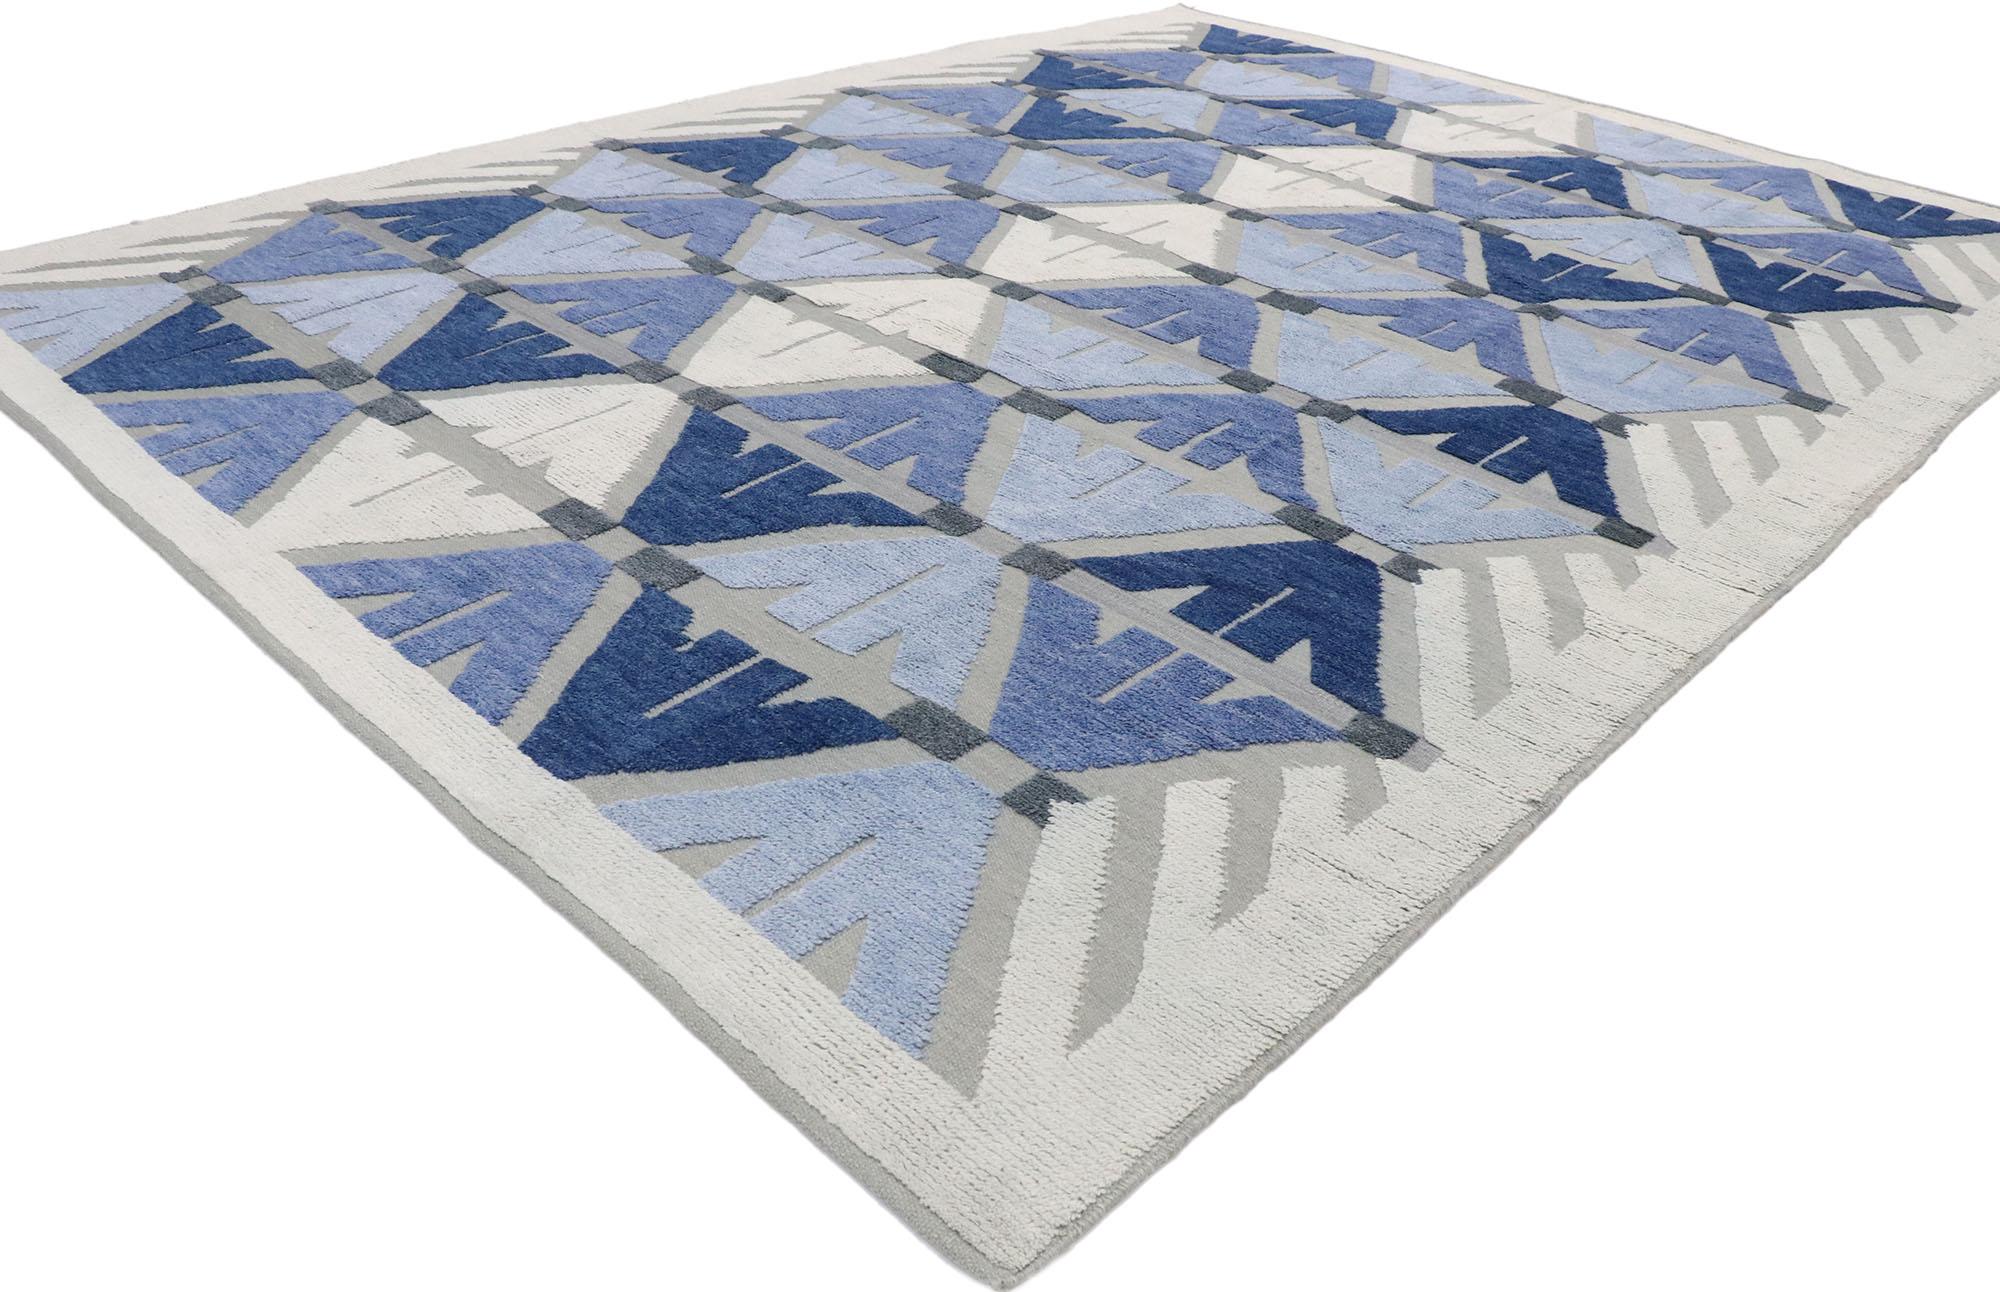 30589, new contemporary Indian Kilim Souf rug with Raised design. A dynamic fusion of contemporary trends and modern style casual meets the eye in this geometric rug. It is made with a unique flat-weave Souf technique of hand-woven wool with a high